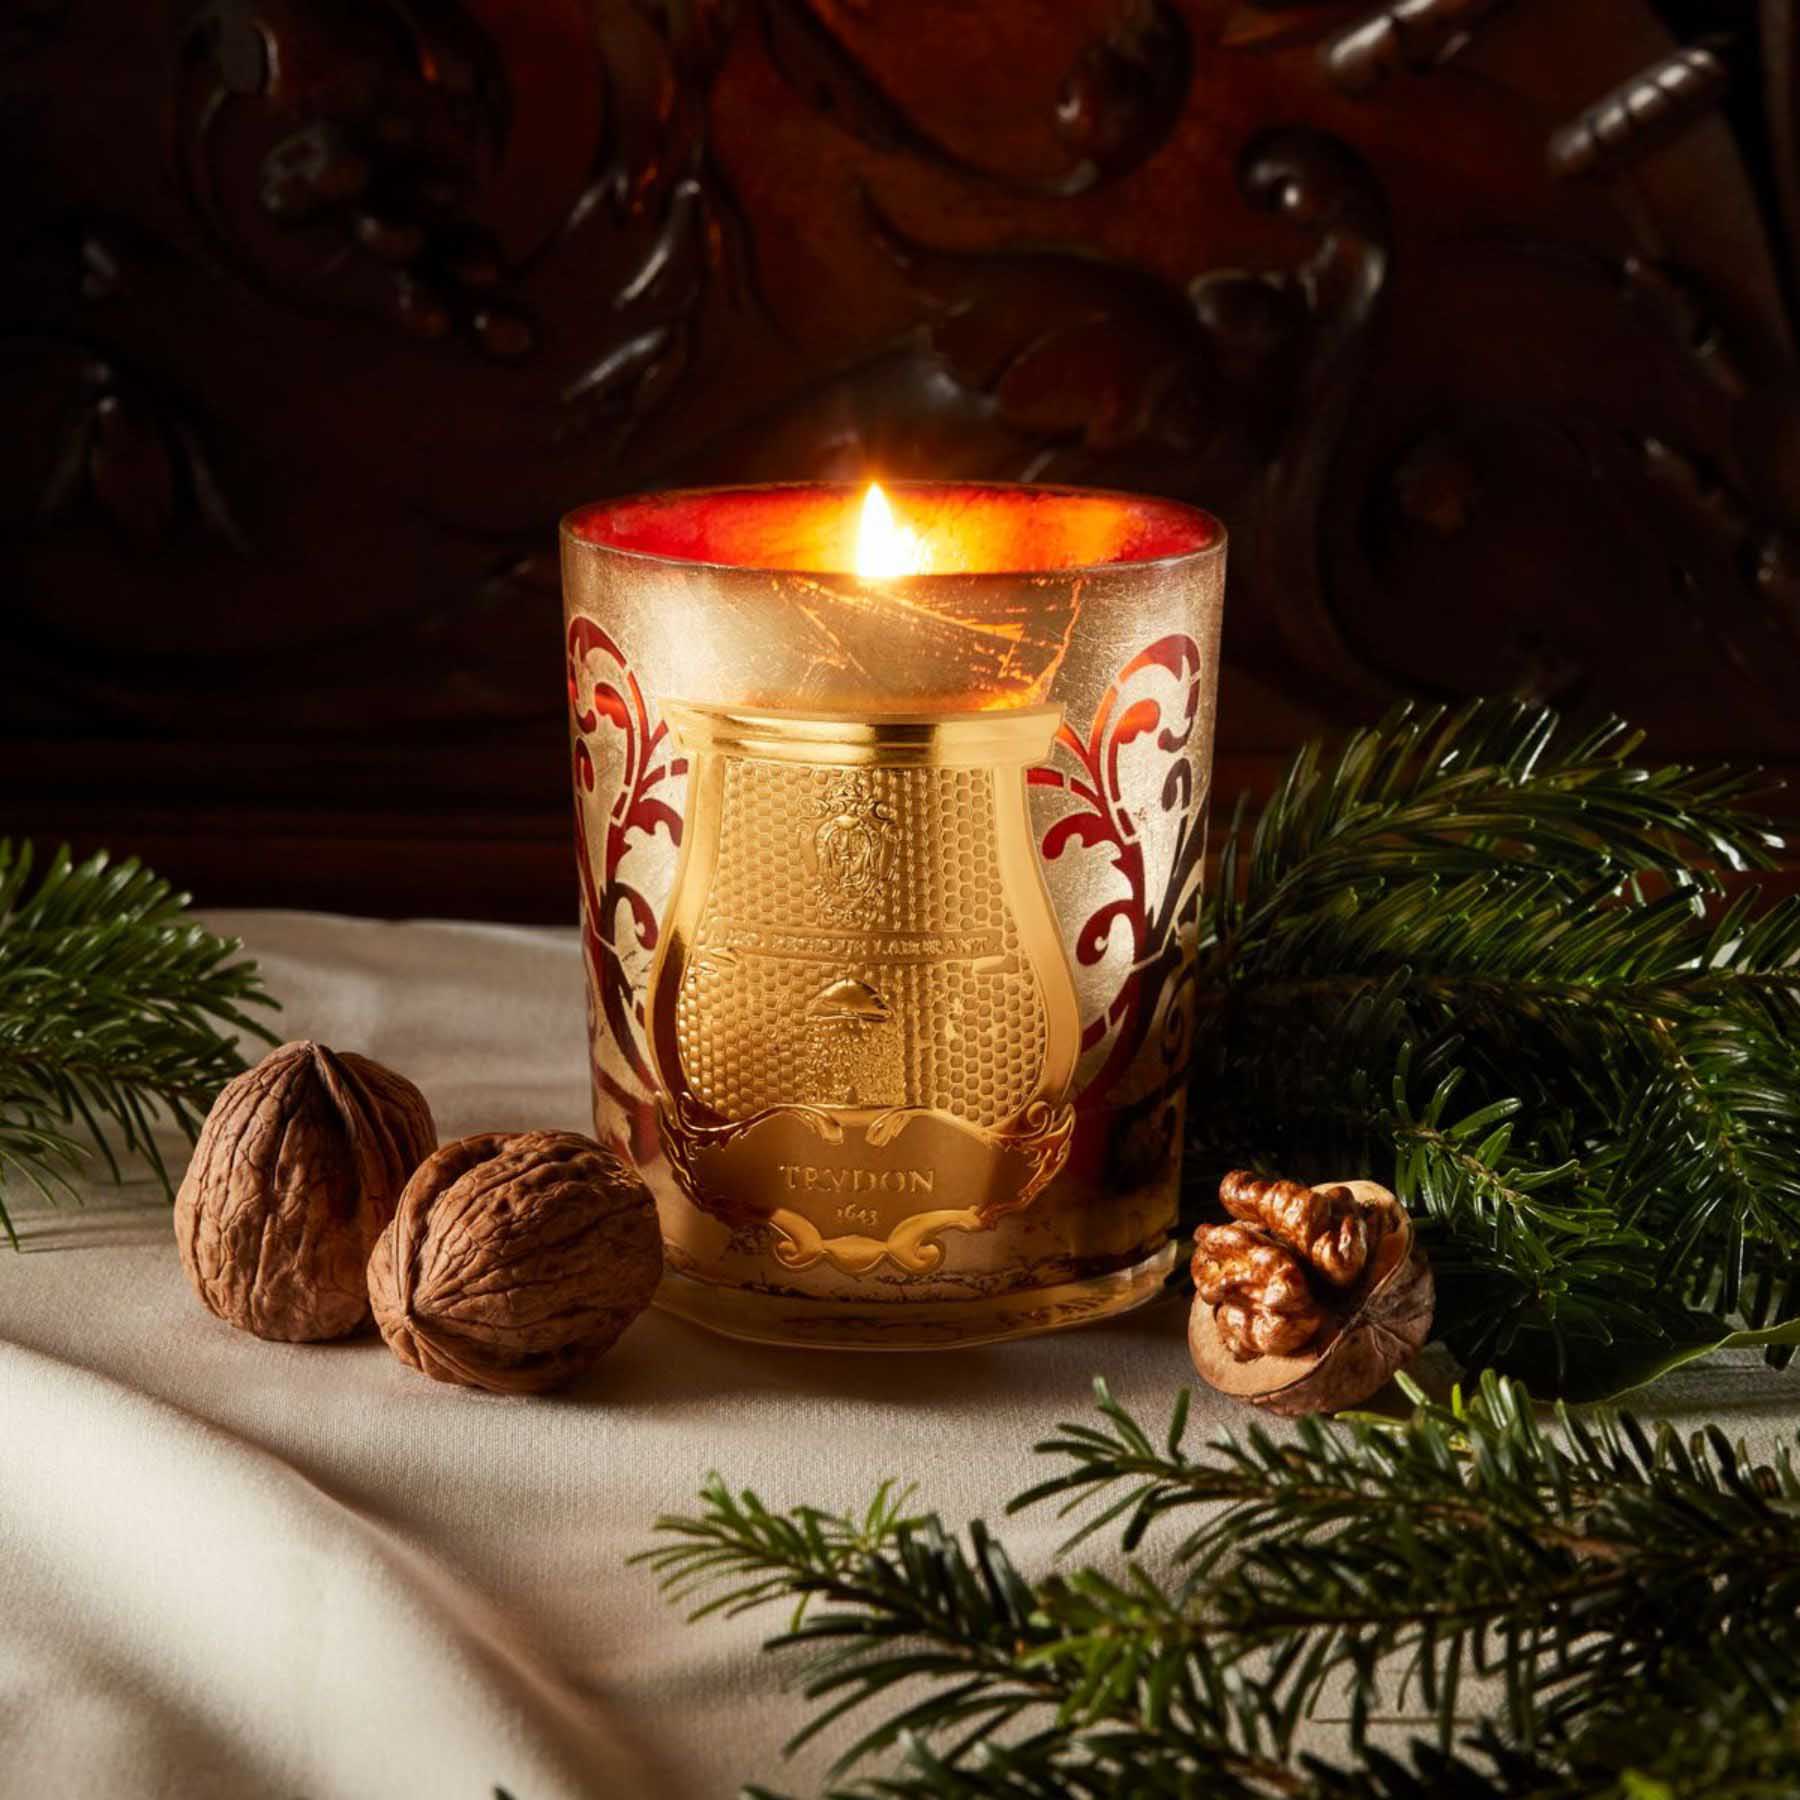 place these scents strategically around your home to release bursts of seasonal aromas